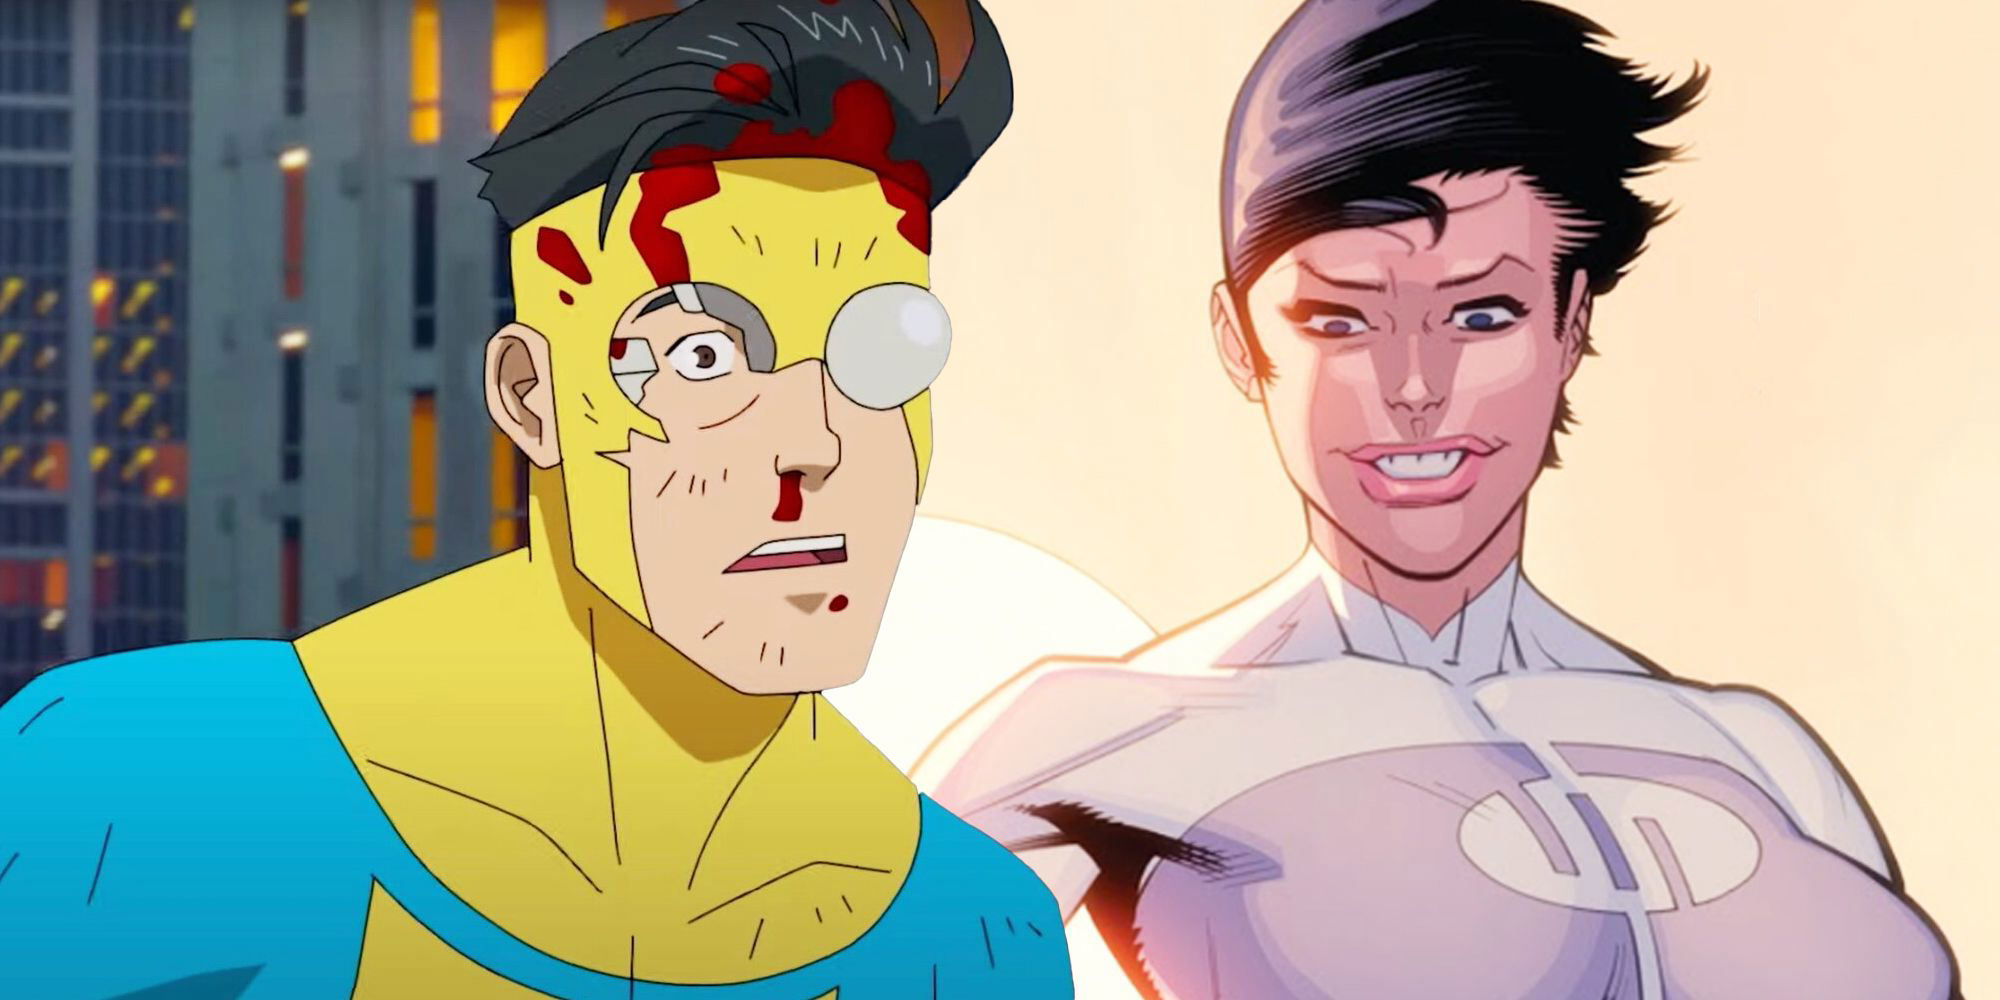 Invincible Season 2 Sets Up A Controversial Character's Debut For Part 2